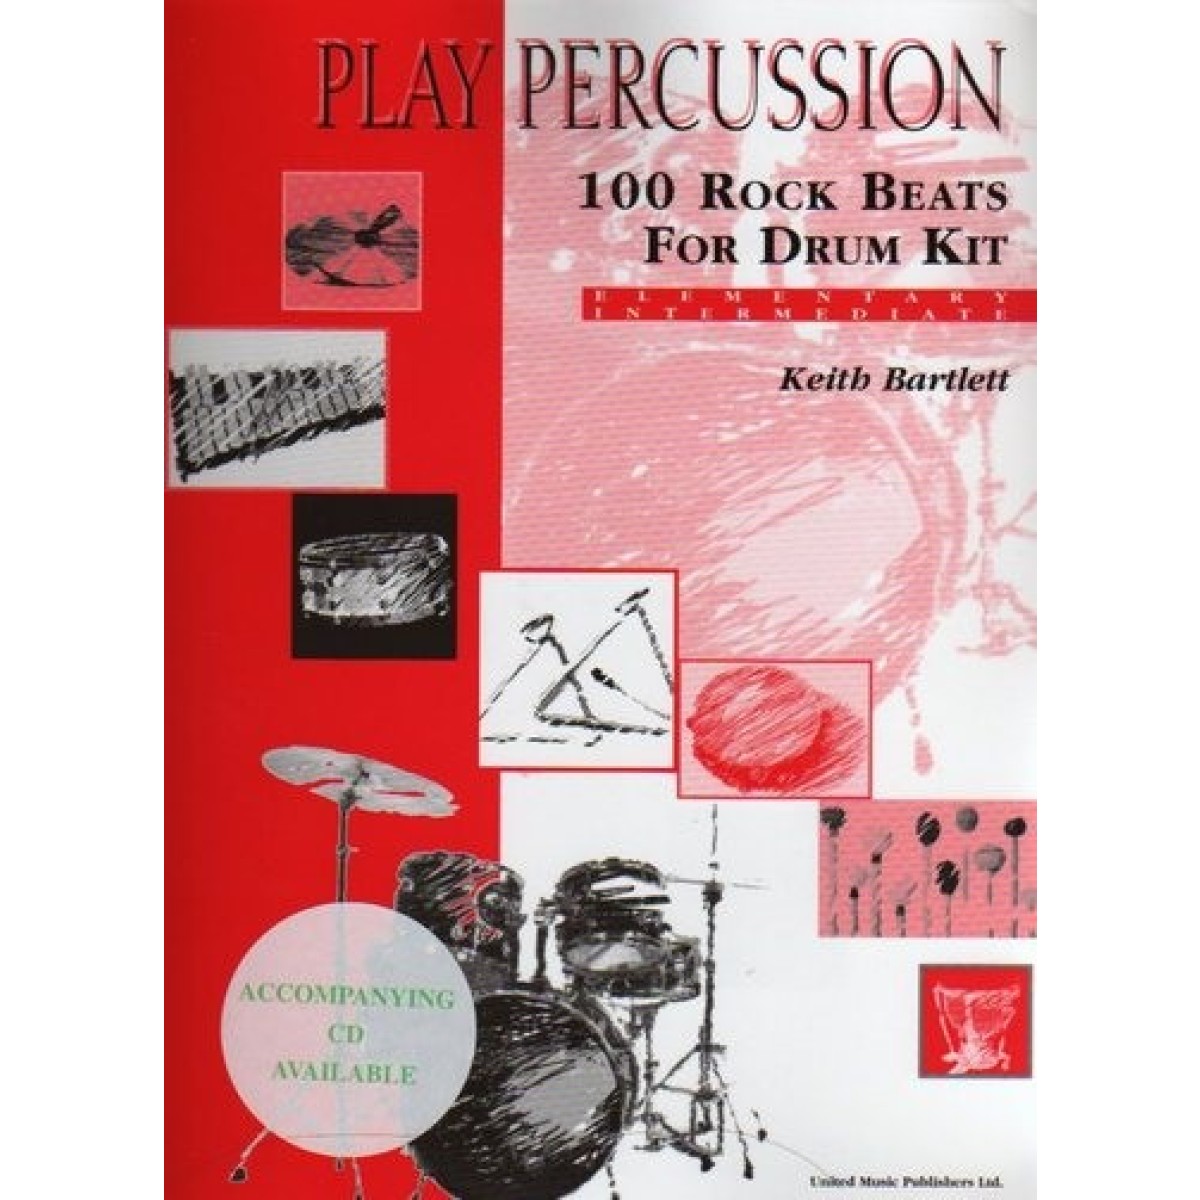 Play Percussion - 100 Rock Beats For Drum Kit